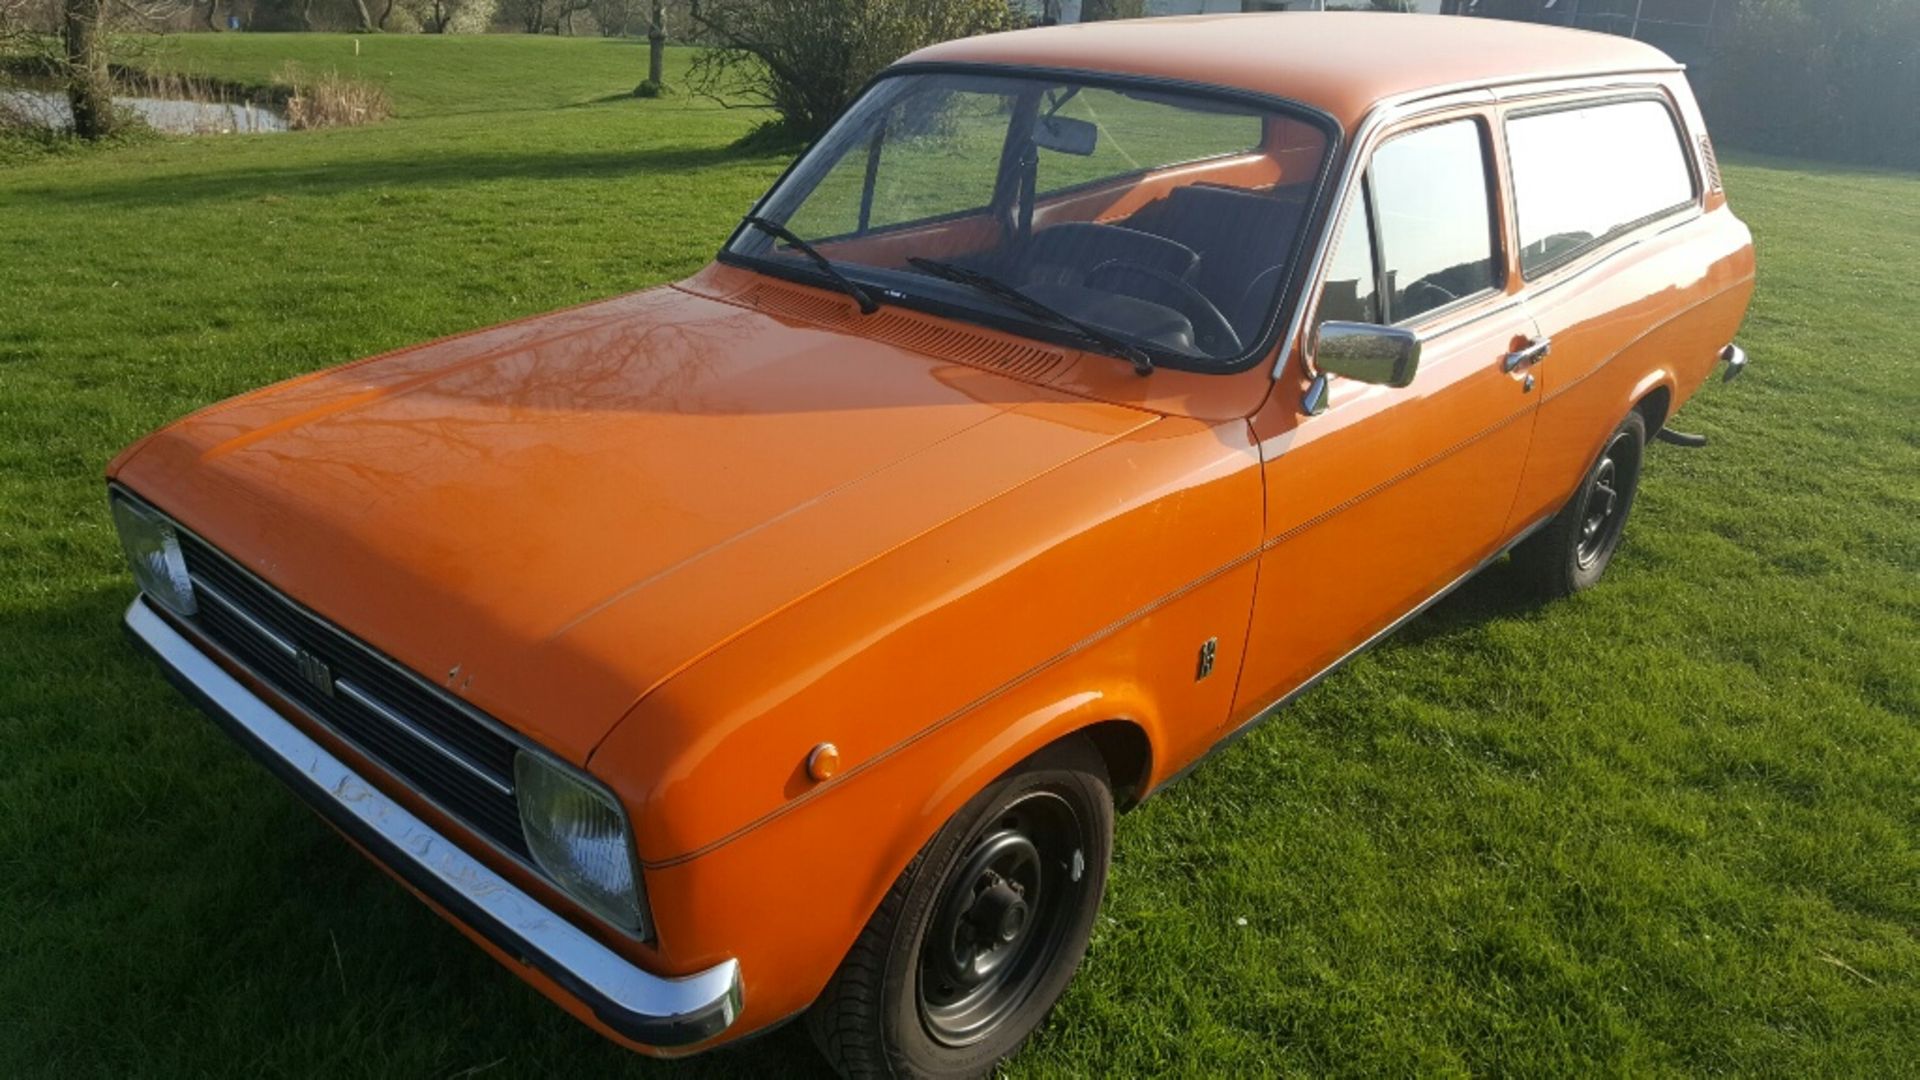 Ford Escort Estate MK2 Automatic 1980 LHD - Just driven 1000 miles from Italy is this very unusual